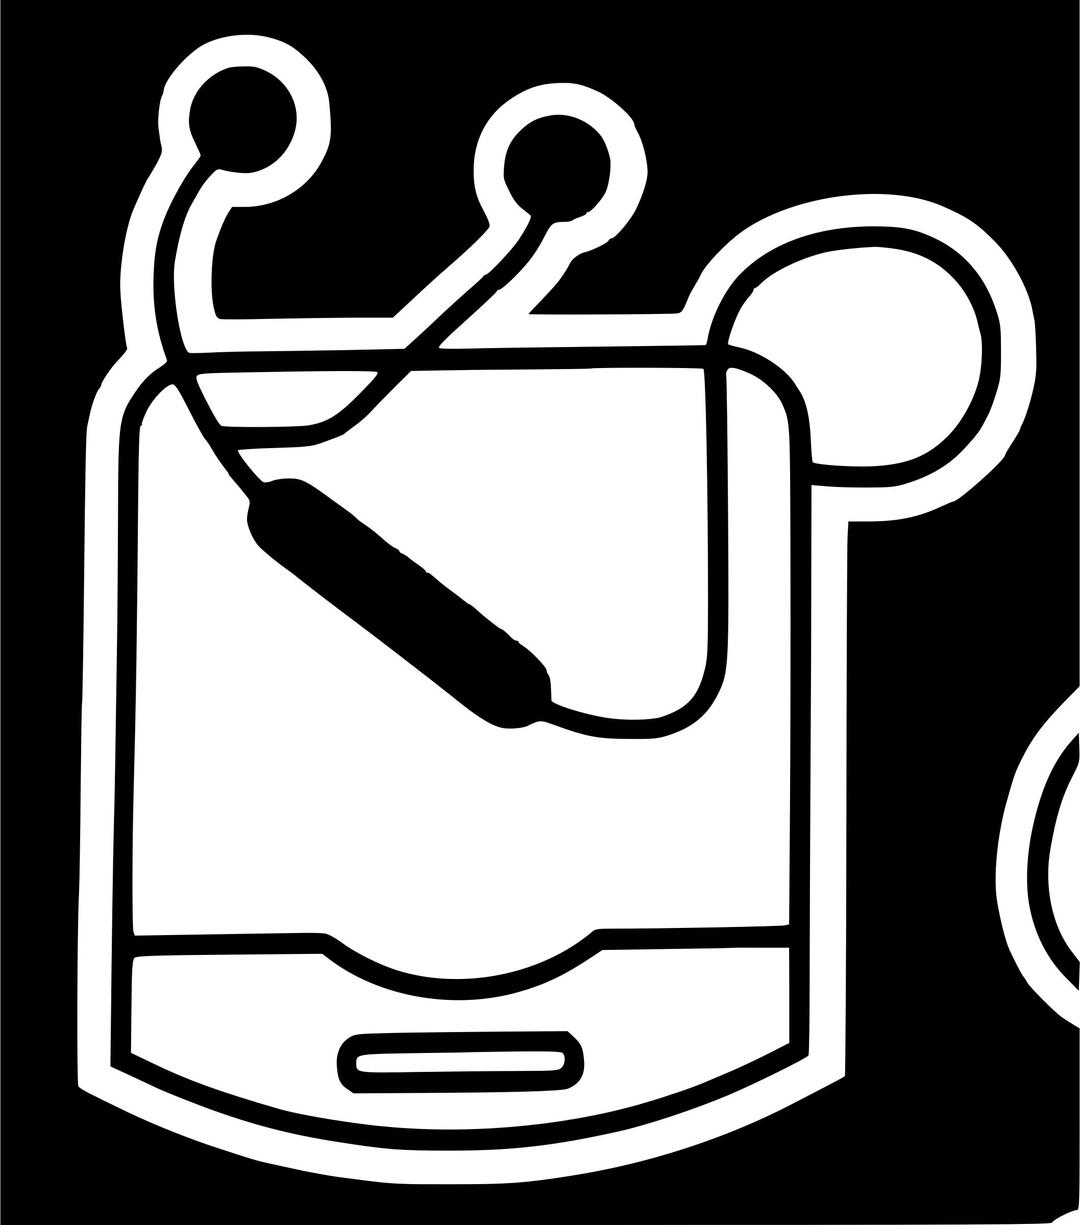 CD player icon png transparent